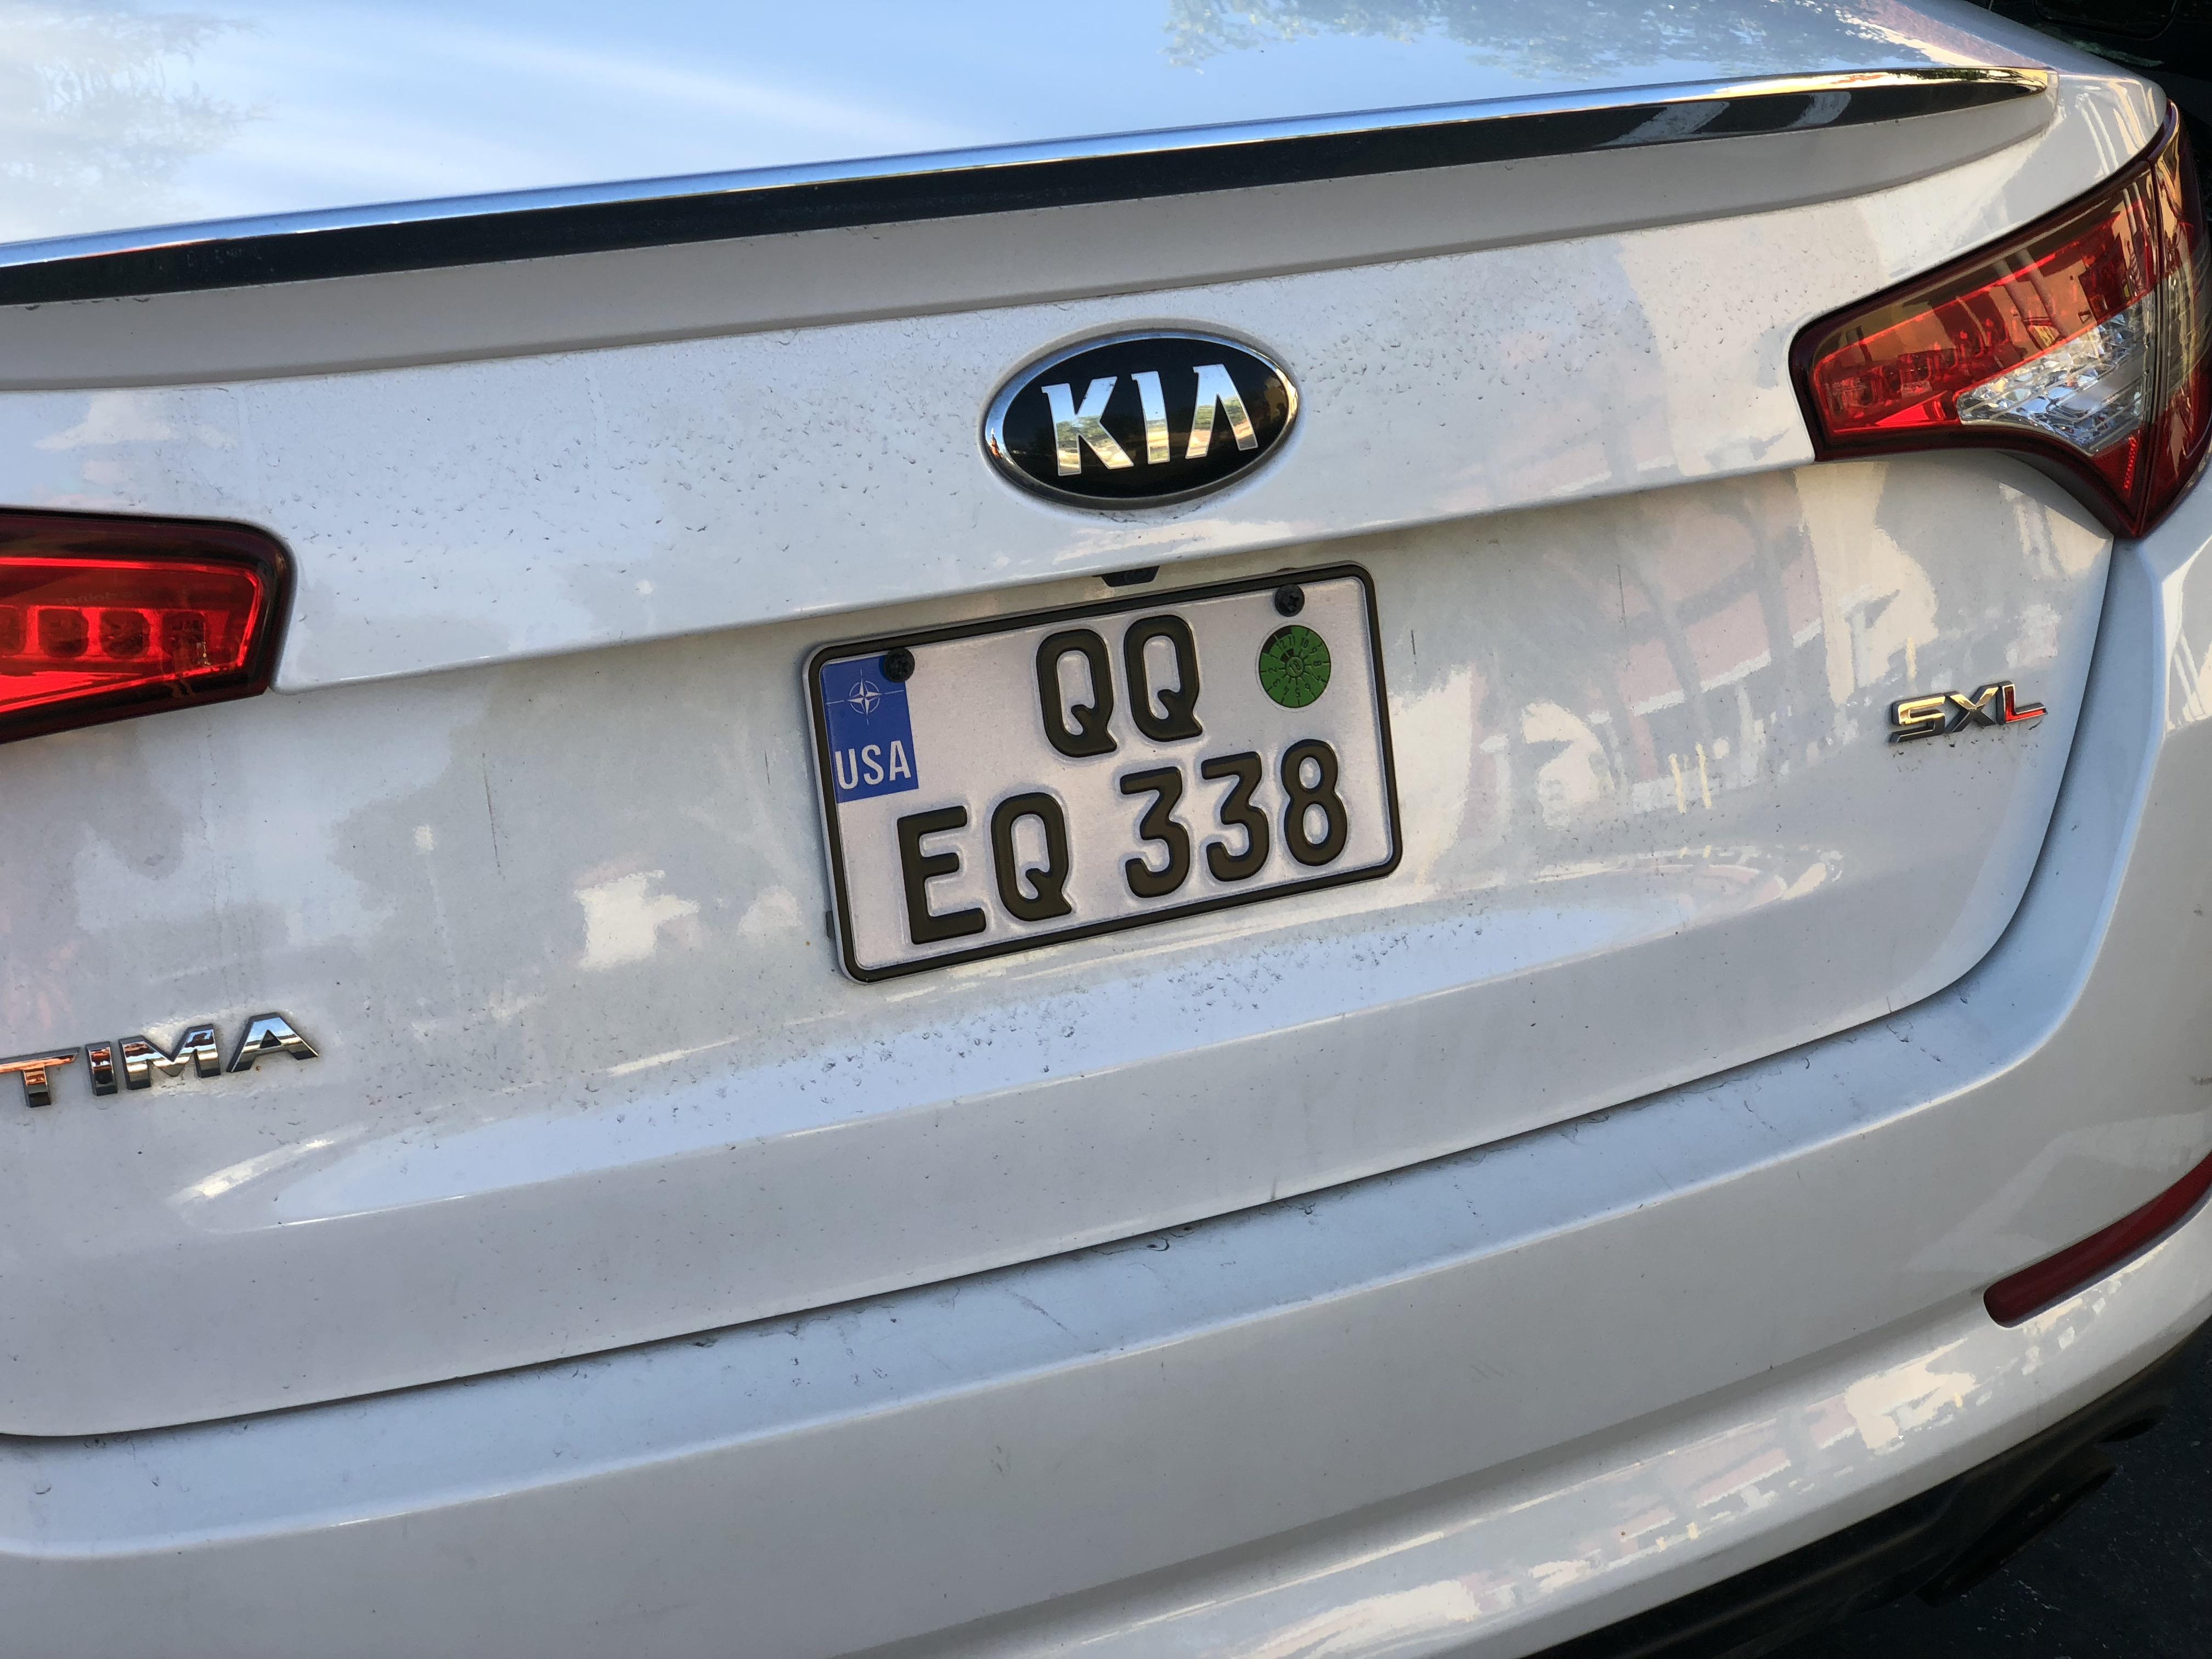 Nato Logo - What's this weird license plate? Notice the NATO logo top left ...